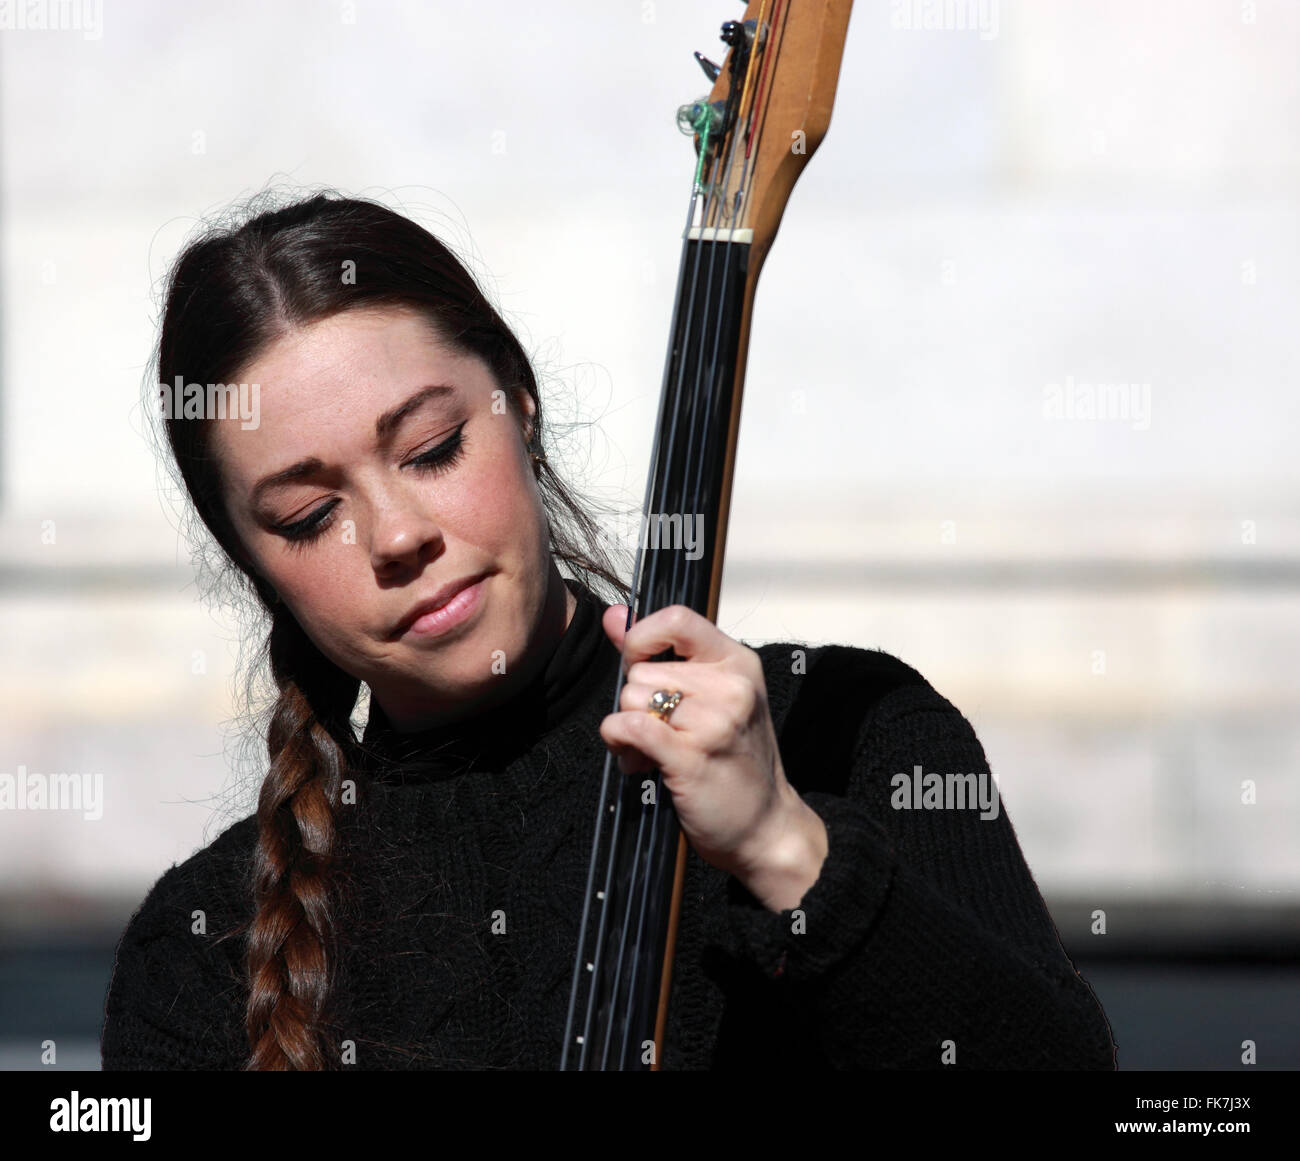 Young woman playing musical instrument Washington Square Park Greenwich Village New York City Stock Photo